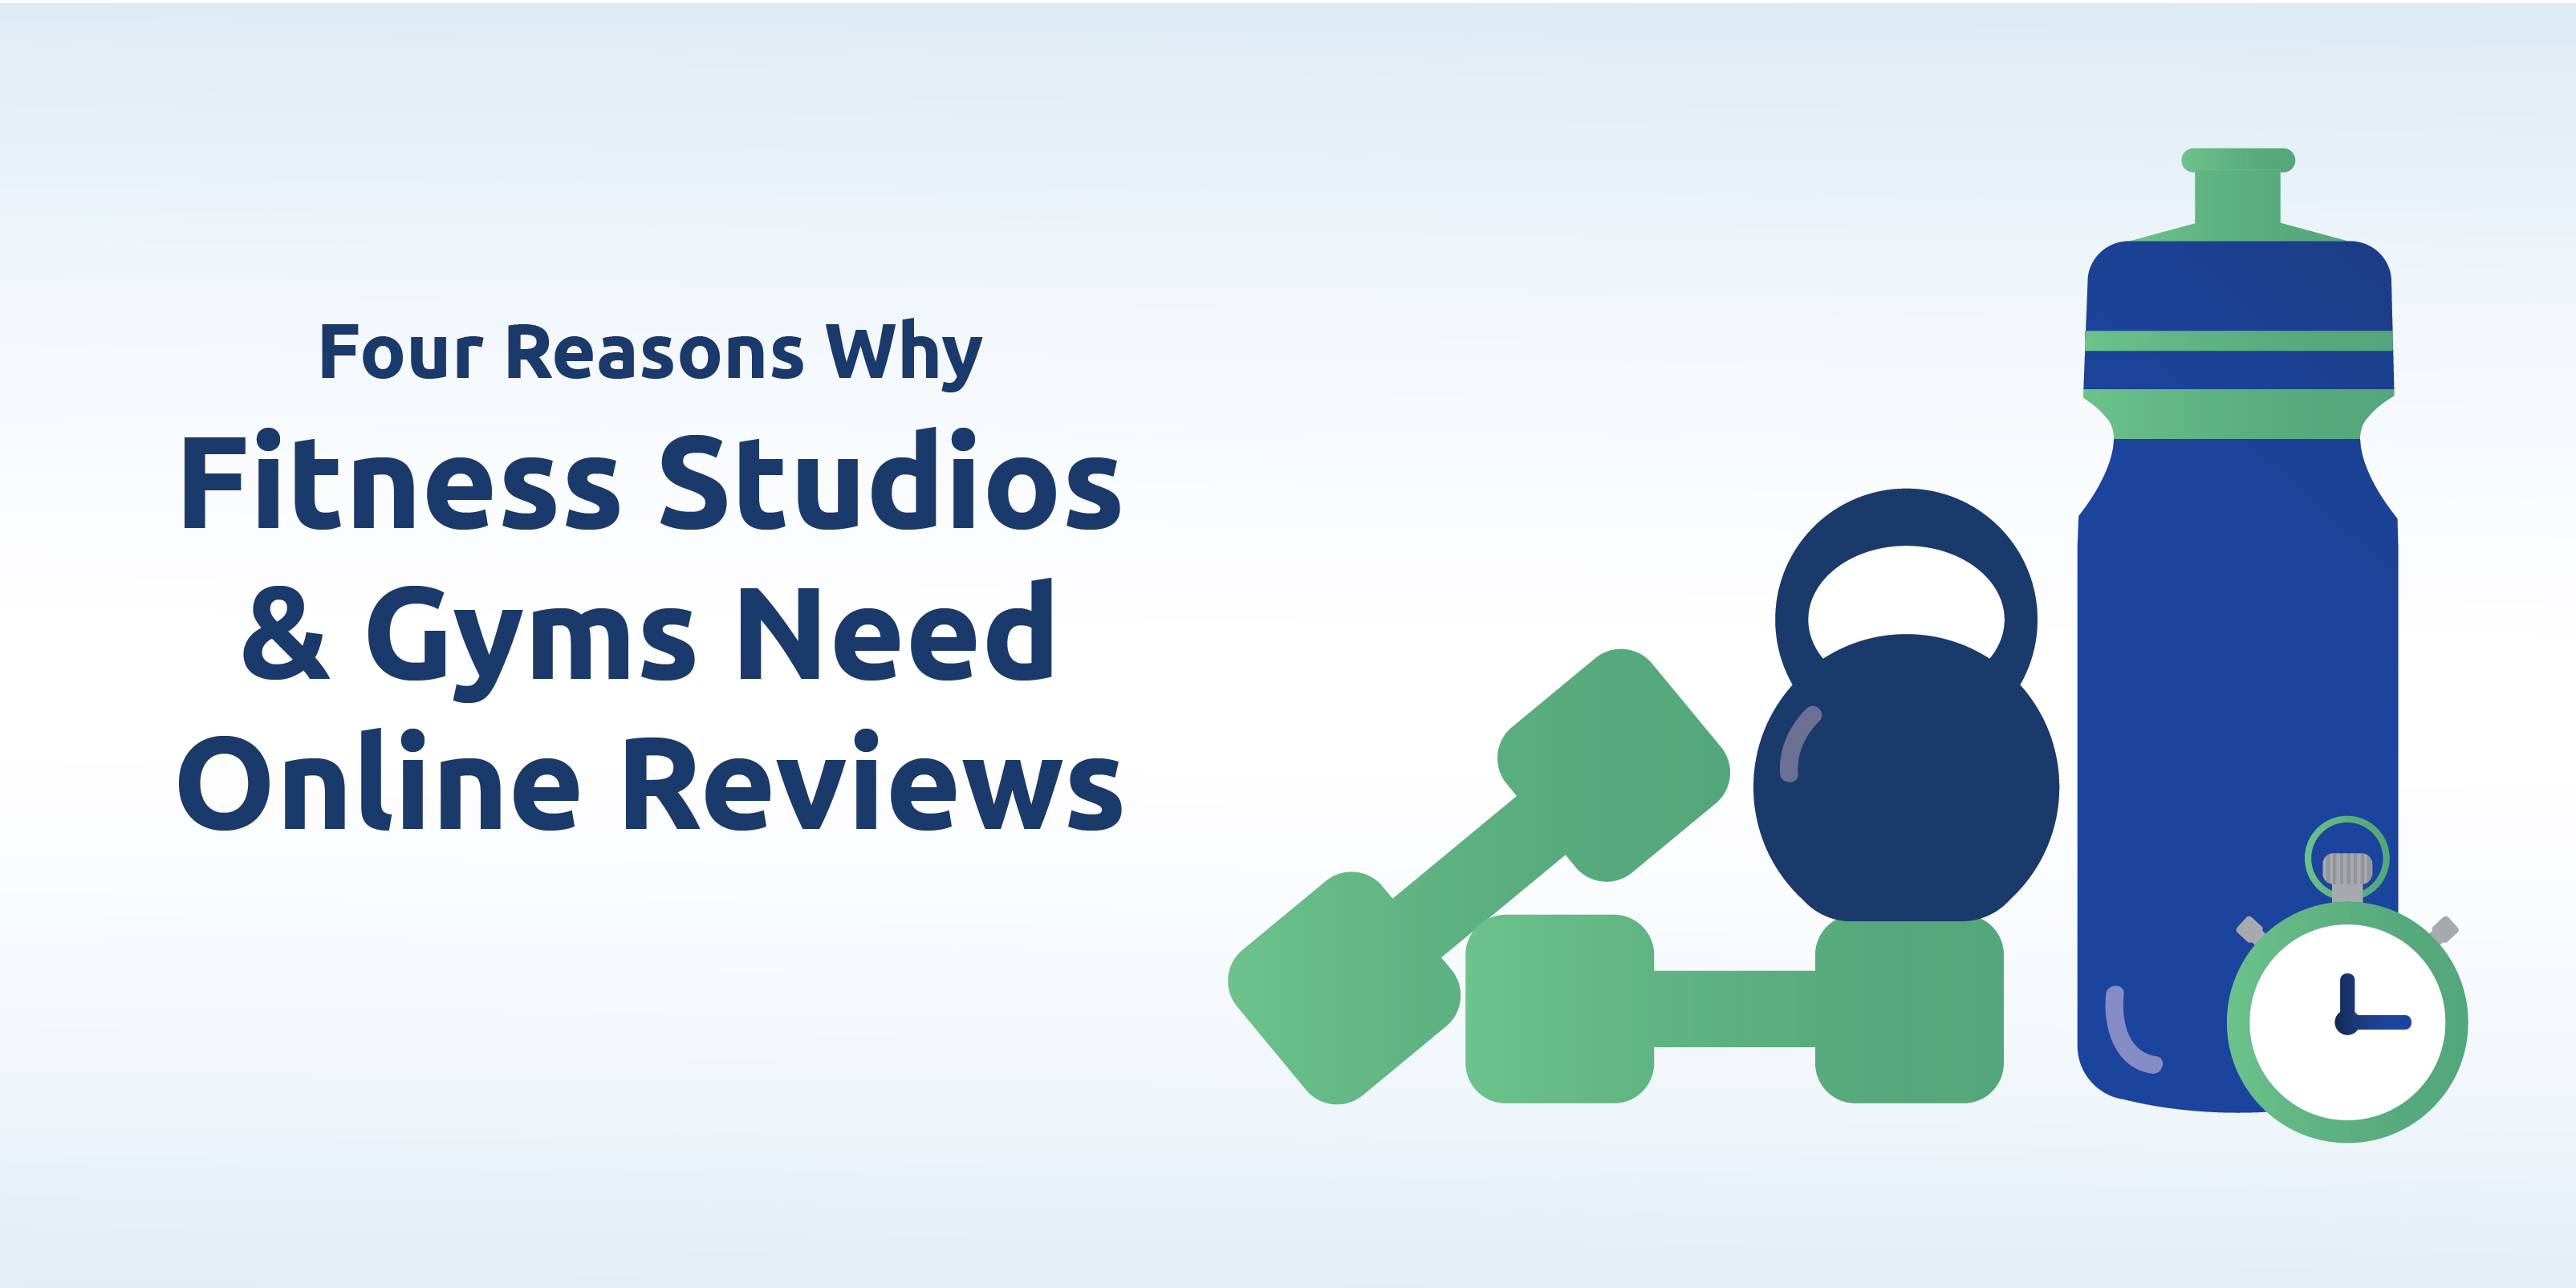 4 reasons why fitness studios & gyms need online reviews